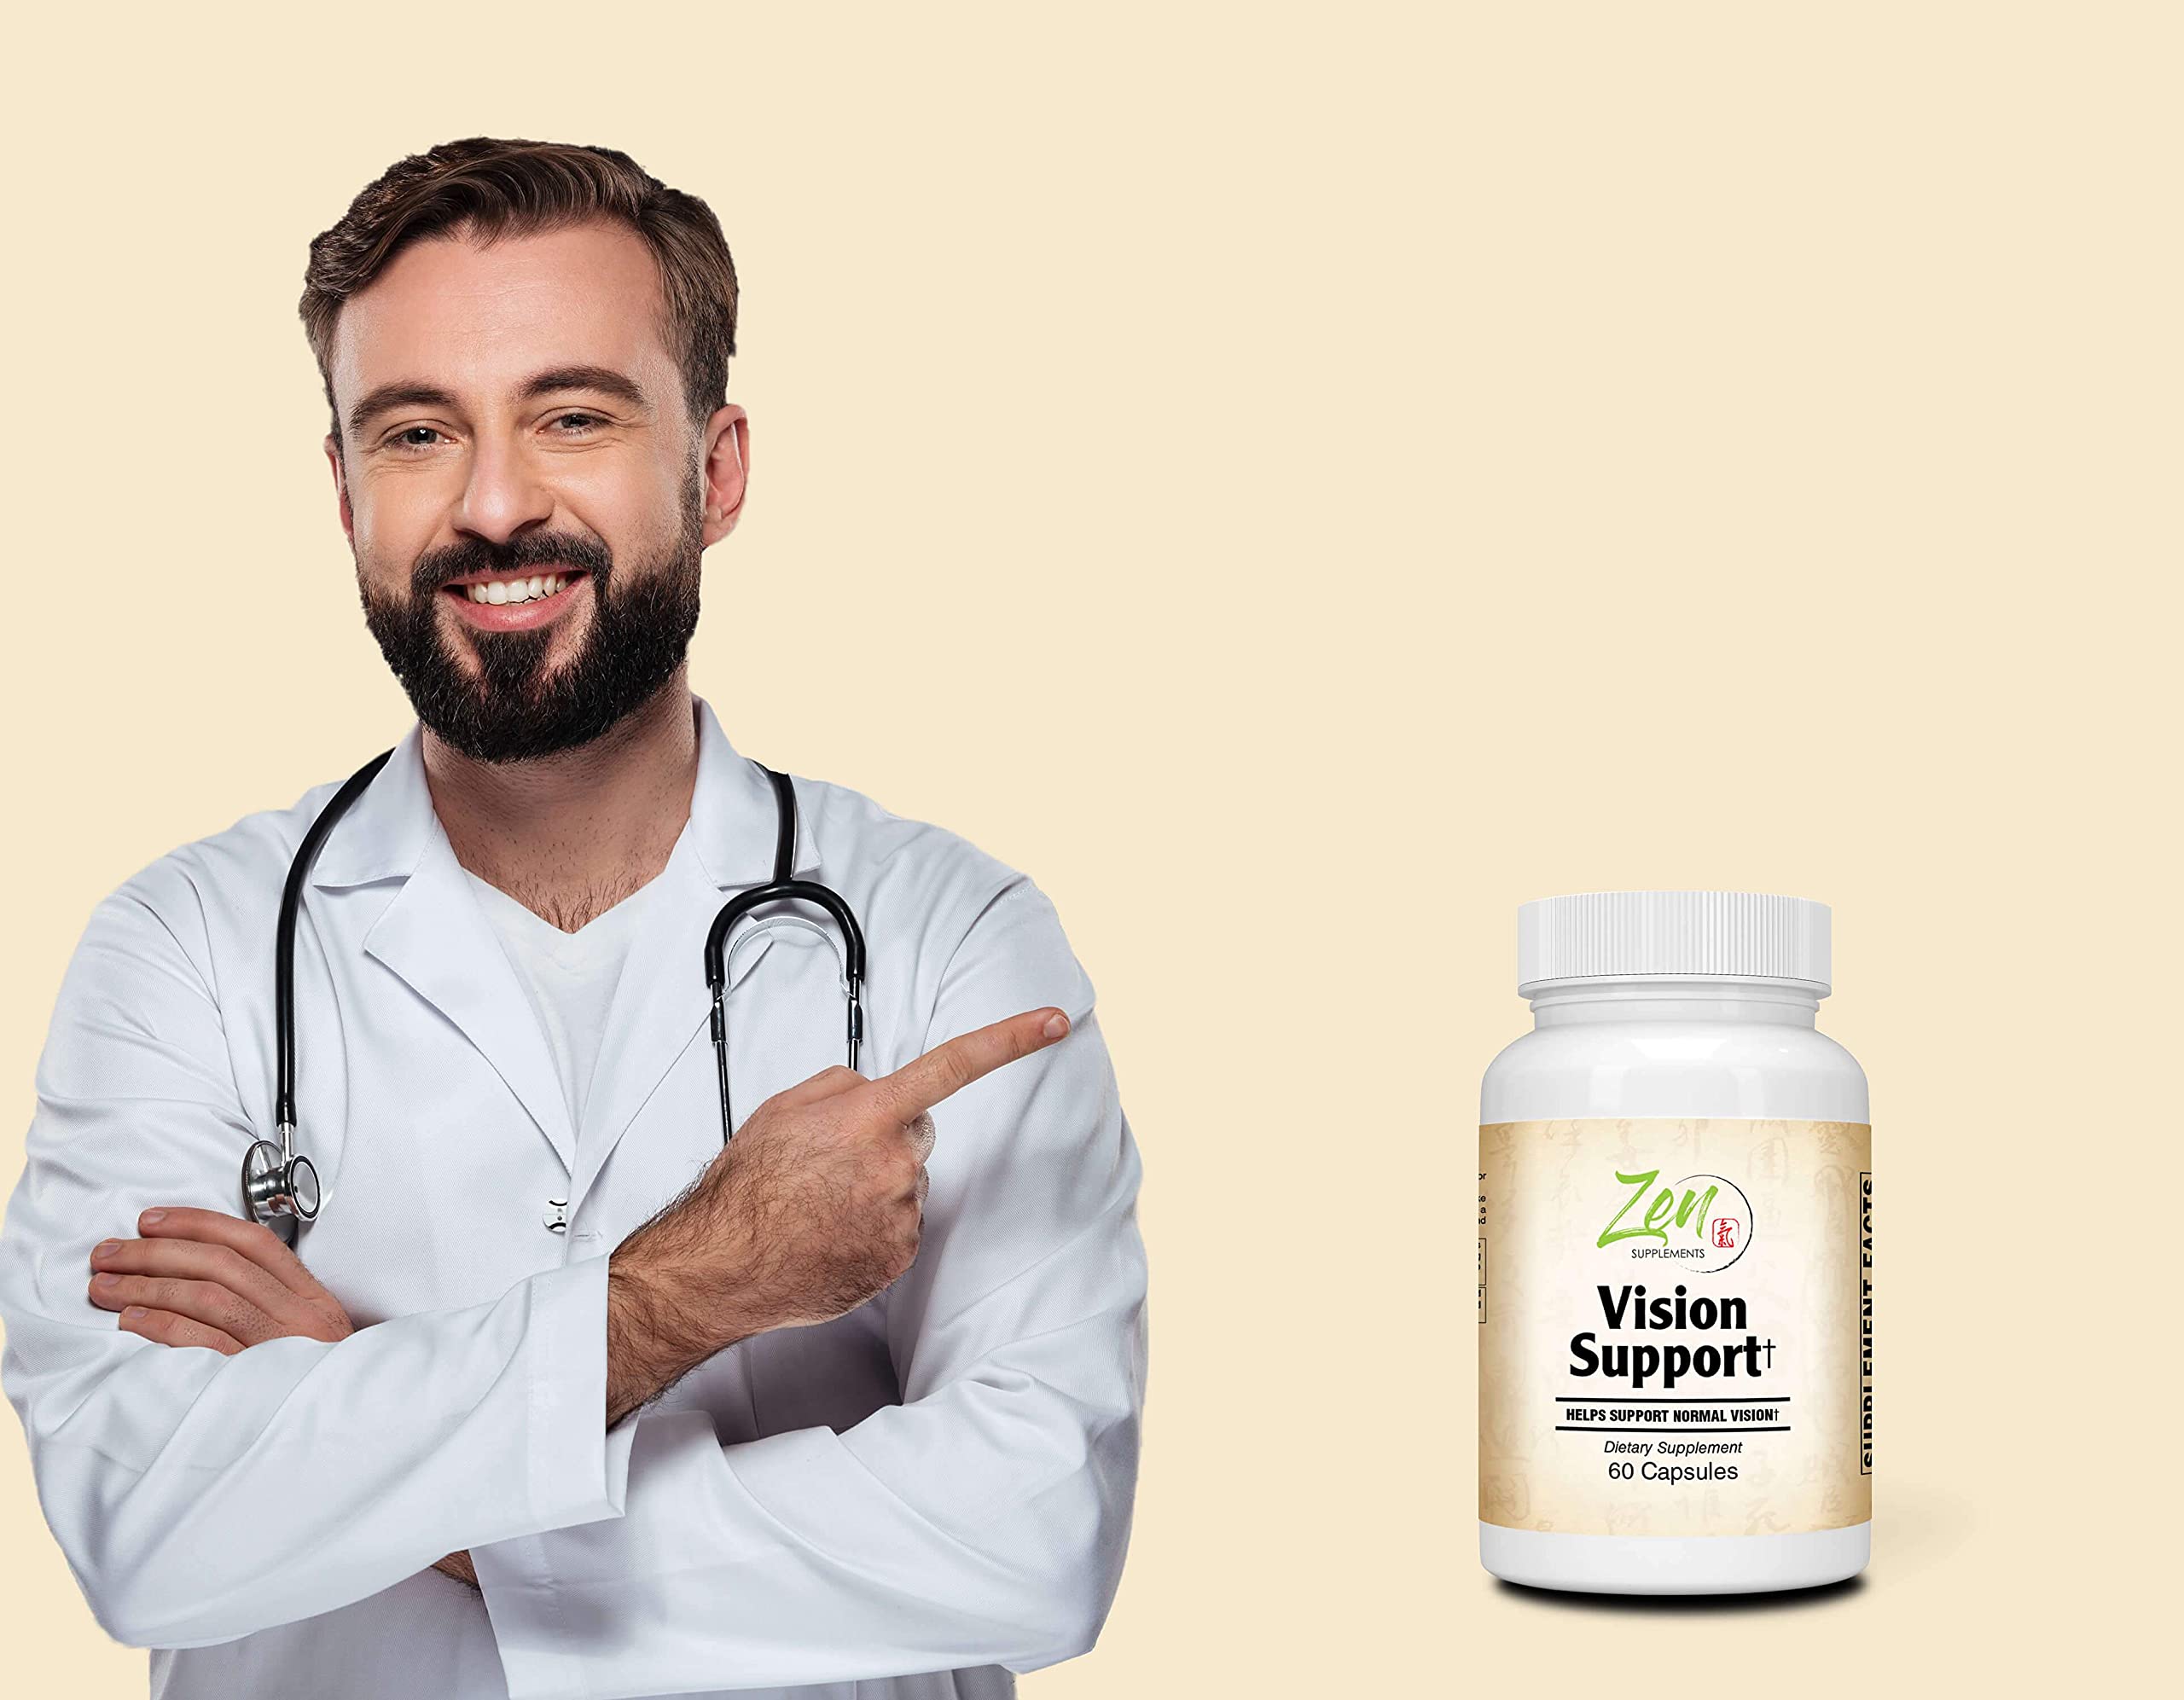 Zen Supplements - Vision Support with Lutein, Bilberry, Eyebright & Carotenoids 60-Caps - Vitamin, Herbal & Nutrient Blend Supports Vision Health & Macular Health